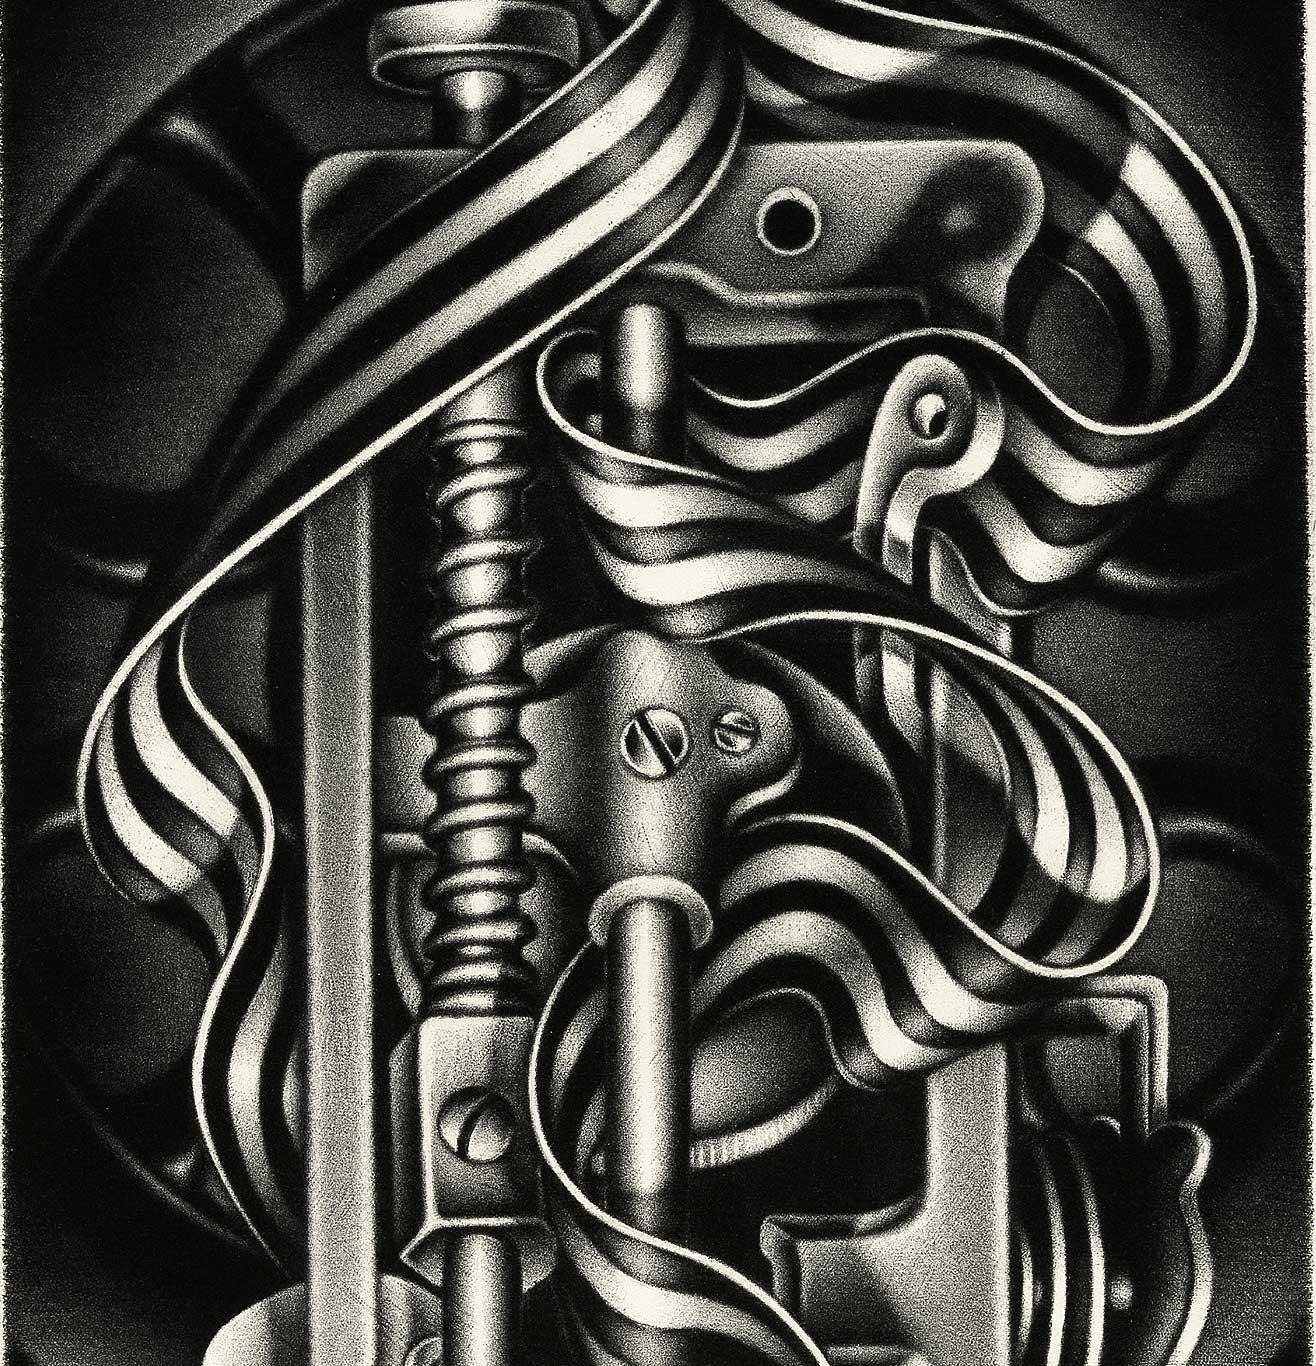 Trim Fit (Deconstructed Singer machine gives both steel and silk equal weight) - Print by Carol Wax